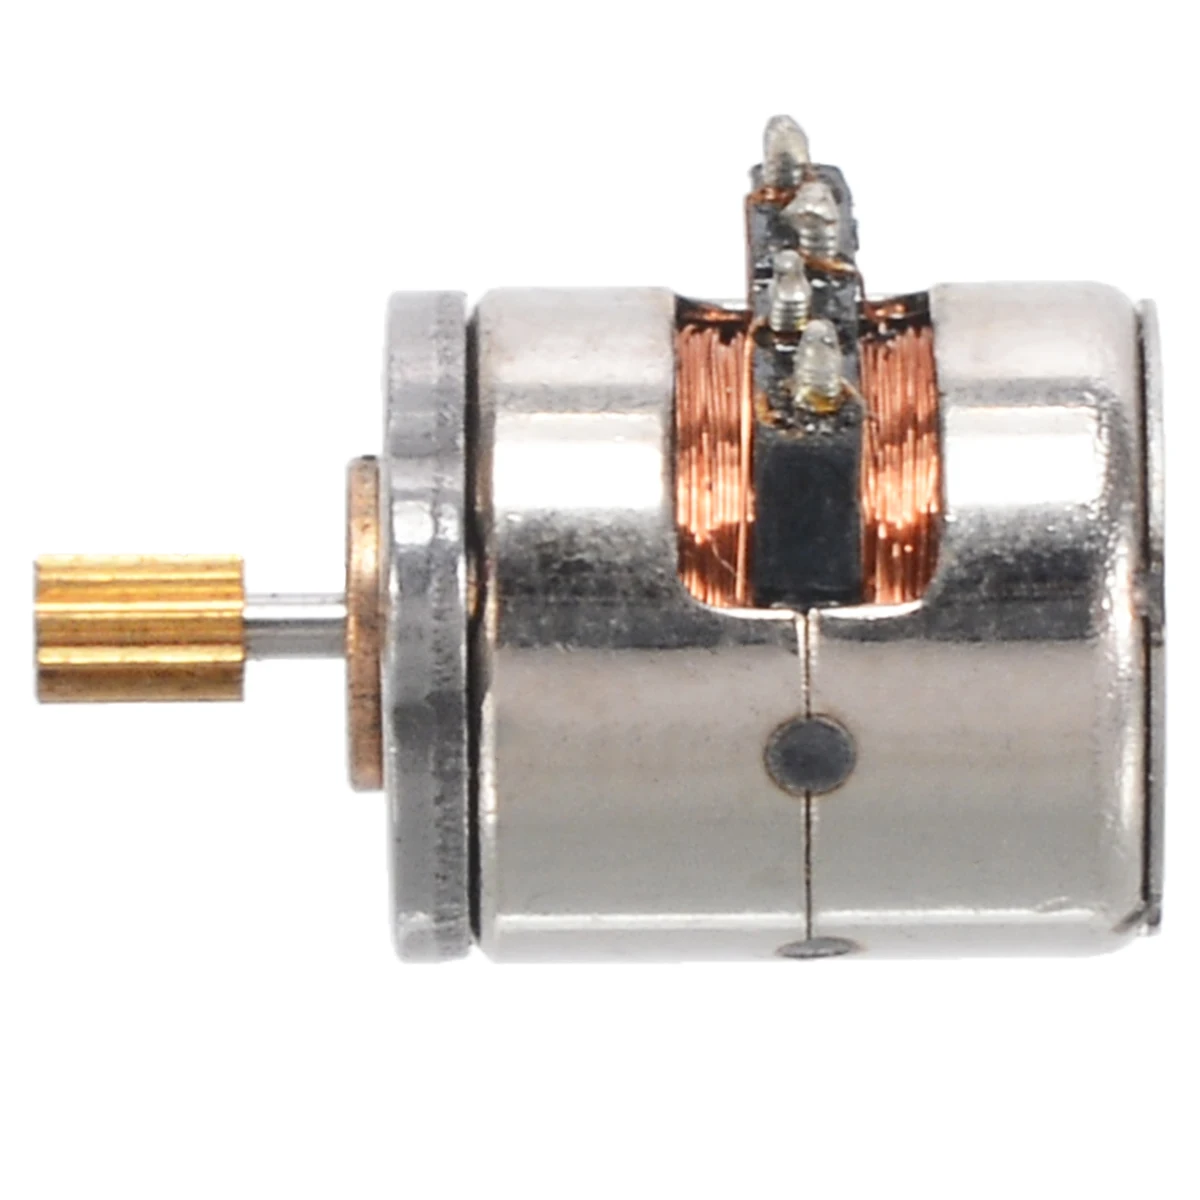 

1pc Micro Stepper Motor Mini 2-phase 4-wire Stepping Motor With Copper Gear for Digital Products Camera 8x9.2mm